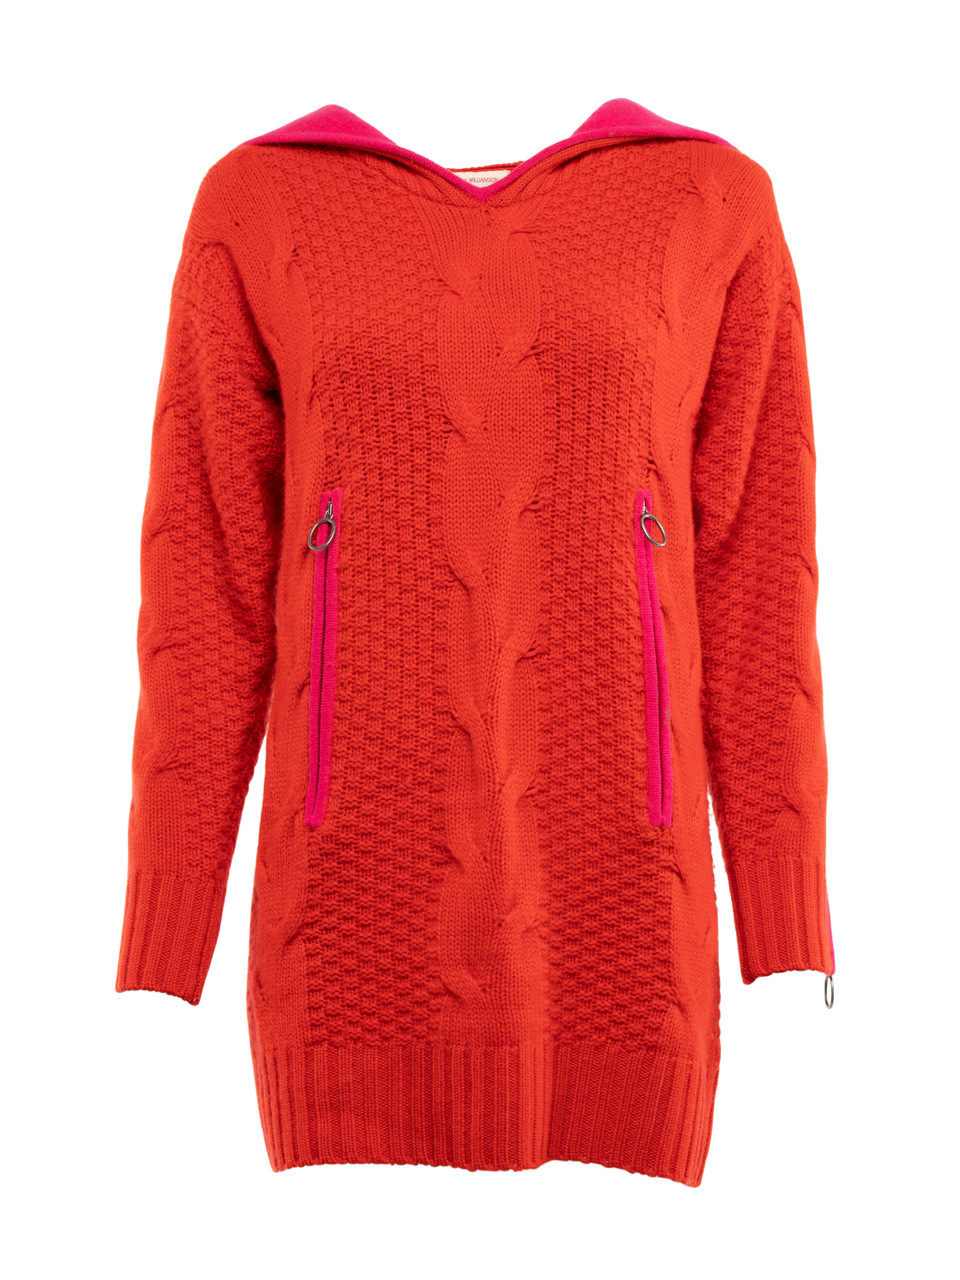 Matthew Williamson Knit Hooded Dress With Pockets